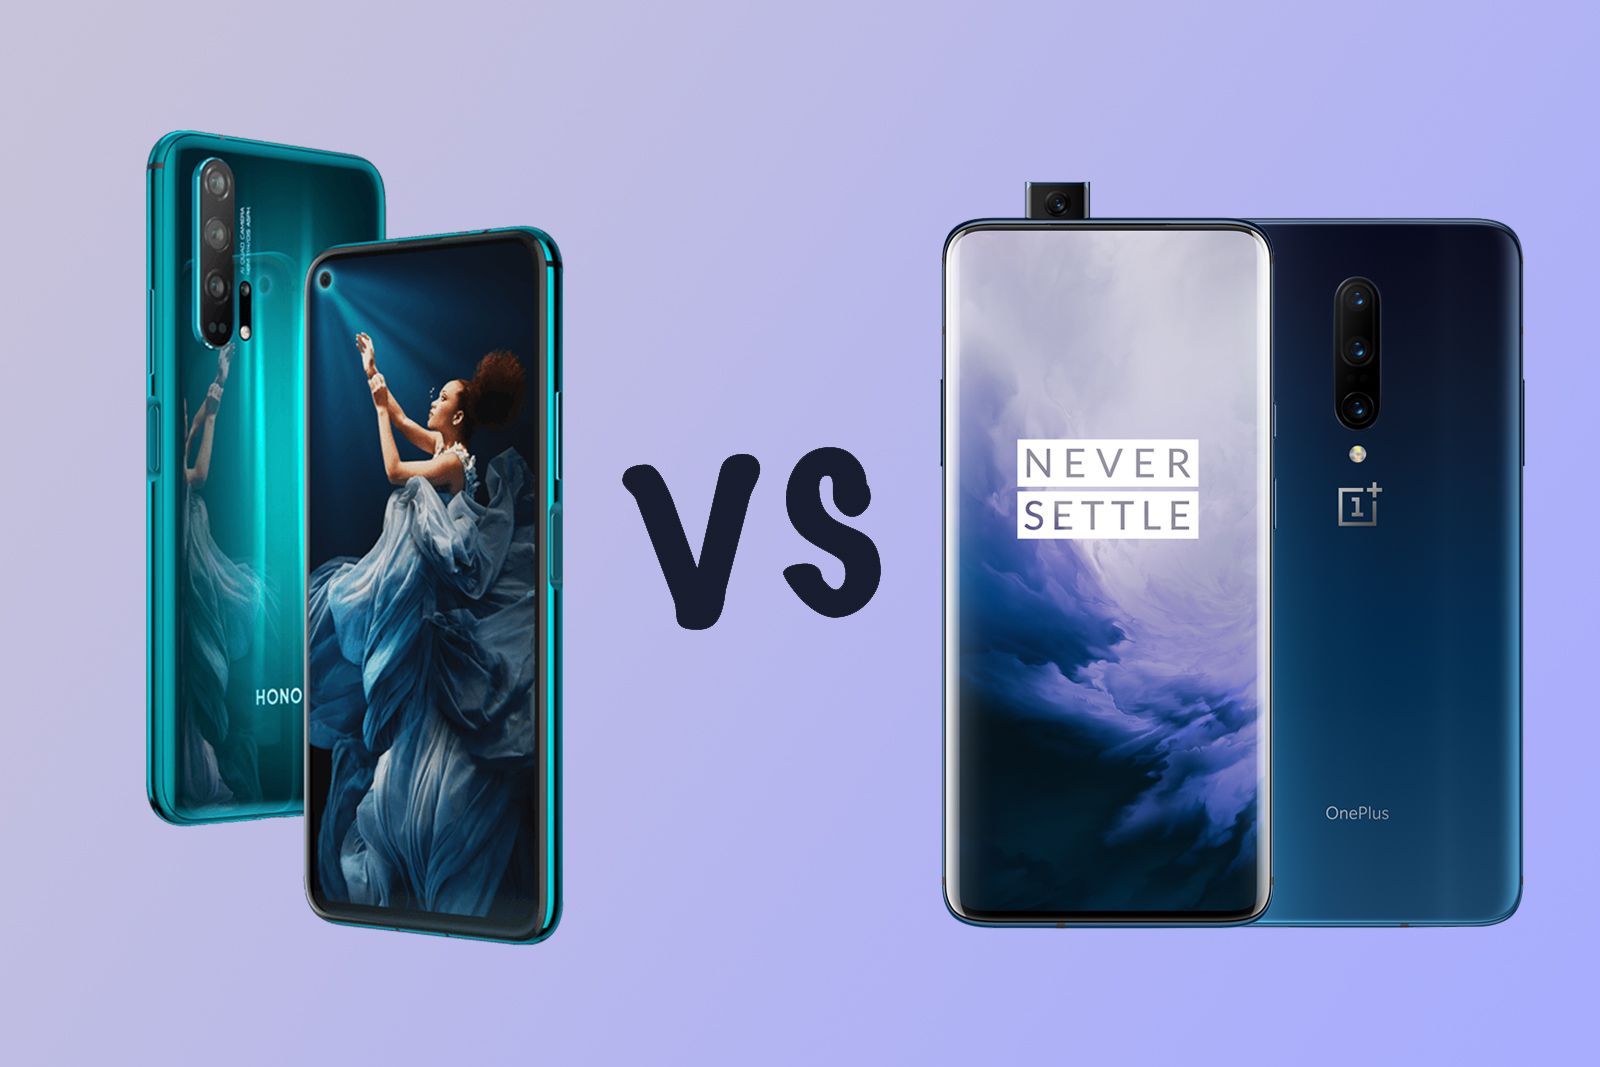 Honor 20 Pro Vs Oneplus 7 Pro Differences And Features Compared image 1